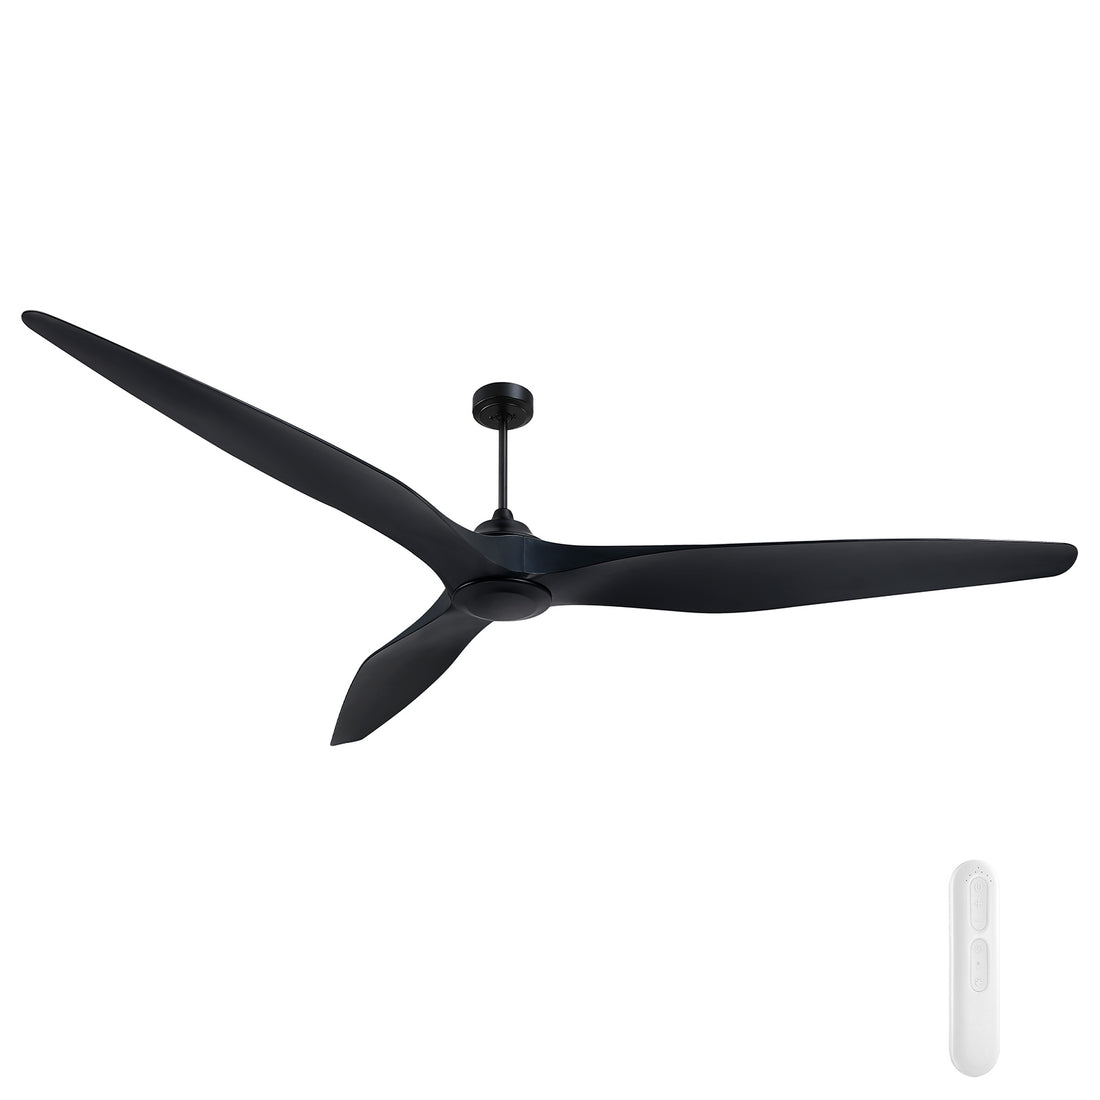 Century 254cm DC Ceiling Fan Kit with Remote